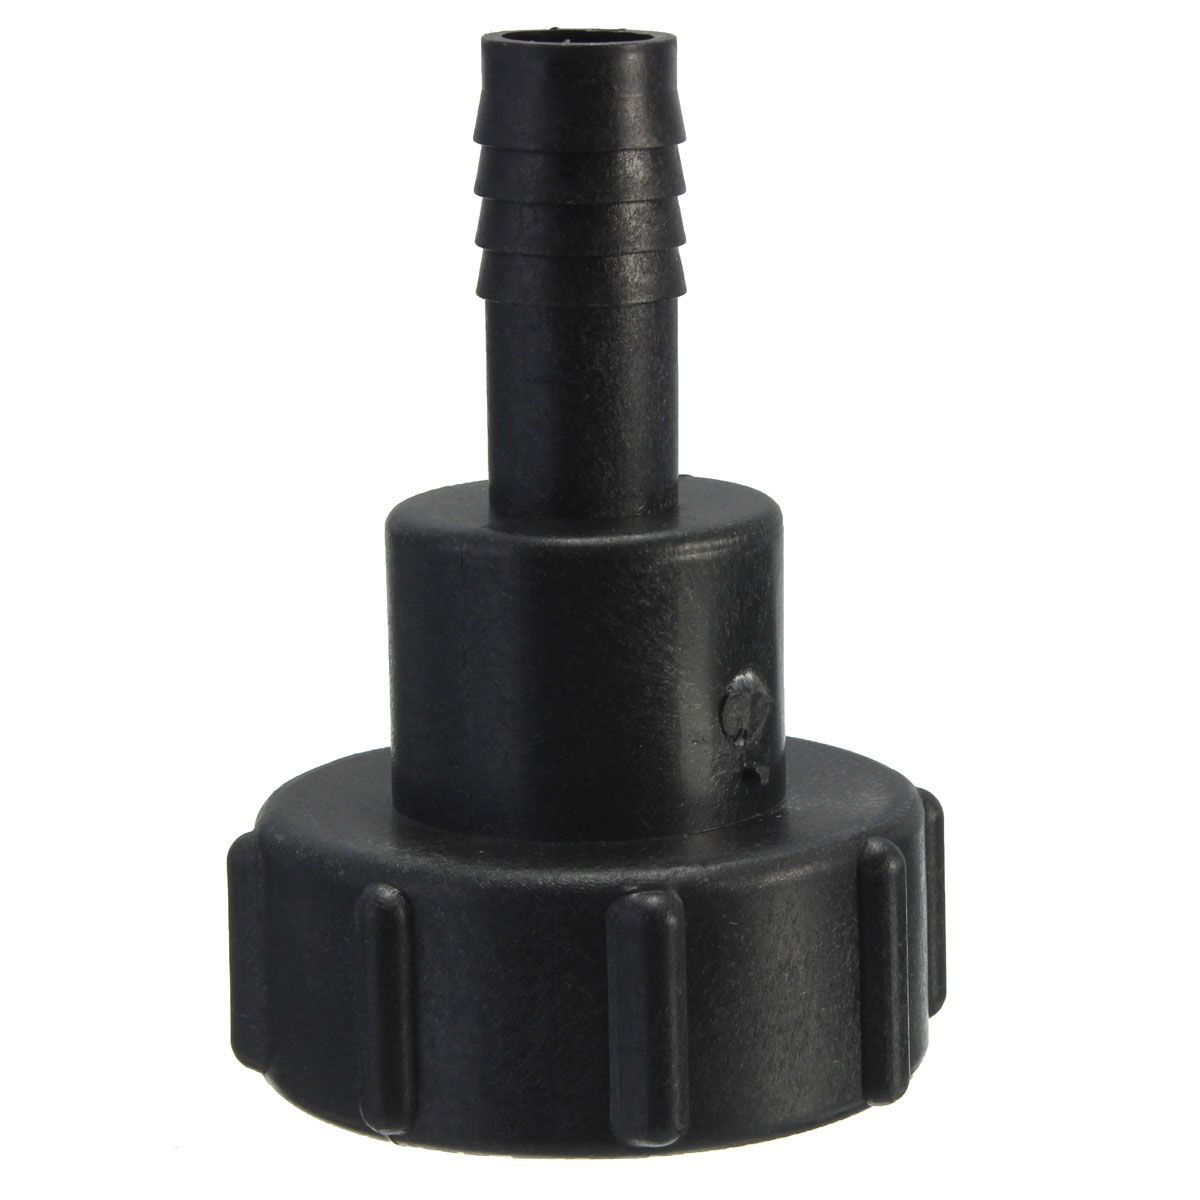 1000L-IBC-To-34-Inch-20MM-Water-Tank-Black-Garden-Hose-Adapter-Fitting-Tool-978481